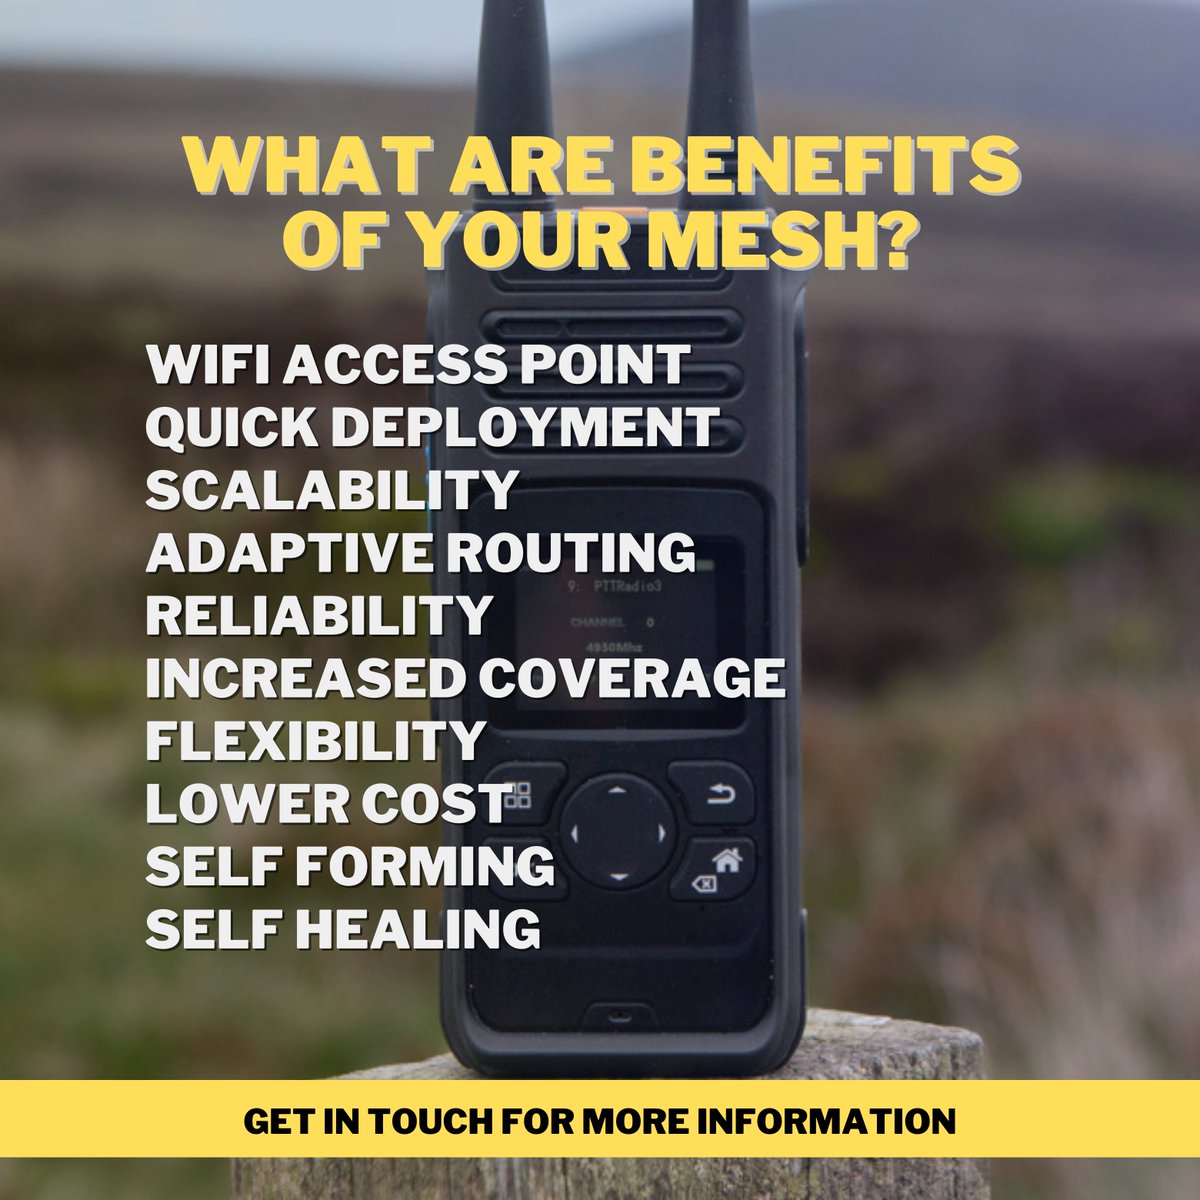 Our mesh has numerous benefits, check out our website sovsys.co for some case studies on how our radios preform in different scenarios, or get in touch for more information.
#meshnetwork #firstresponder #emergencyresponse #securecomms #securecommunications #ipmesh